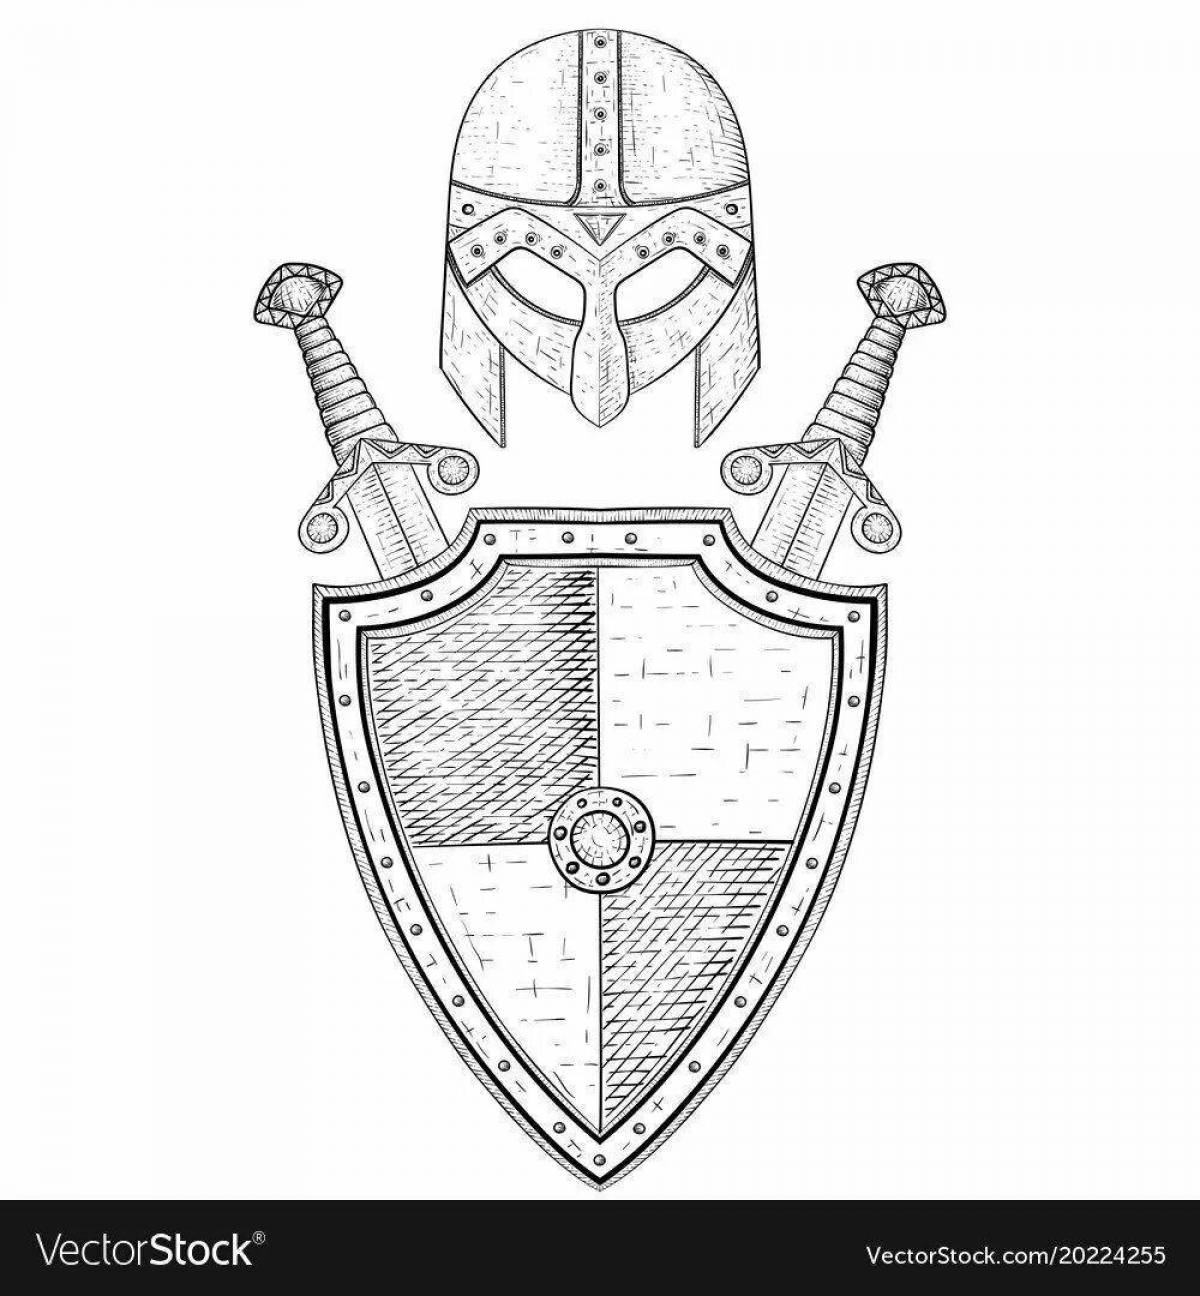 Shining Shield and Sword coloring page